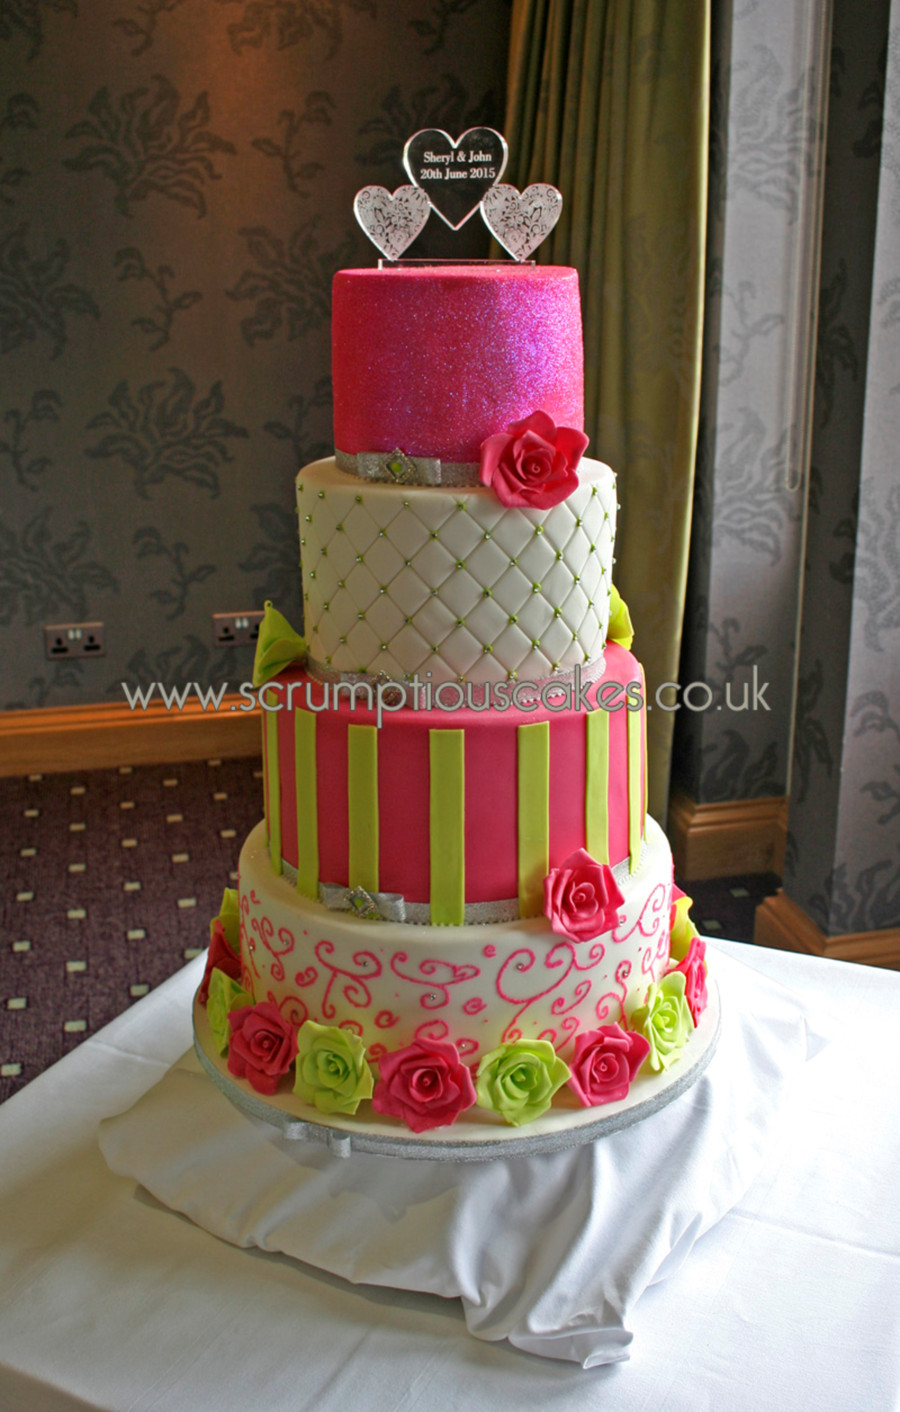 Hot Pink Wedding Cakes
 Hot Pink & Lime Green Wedding Cake CakeCentral